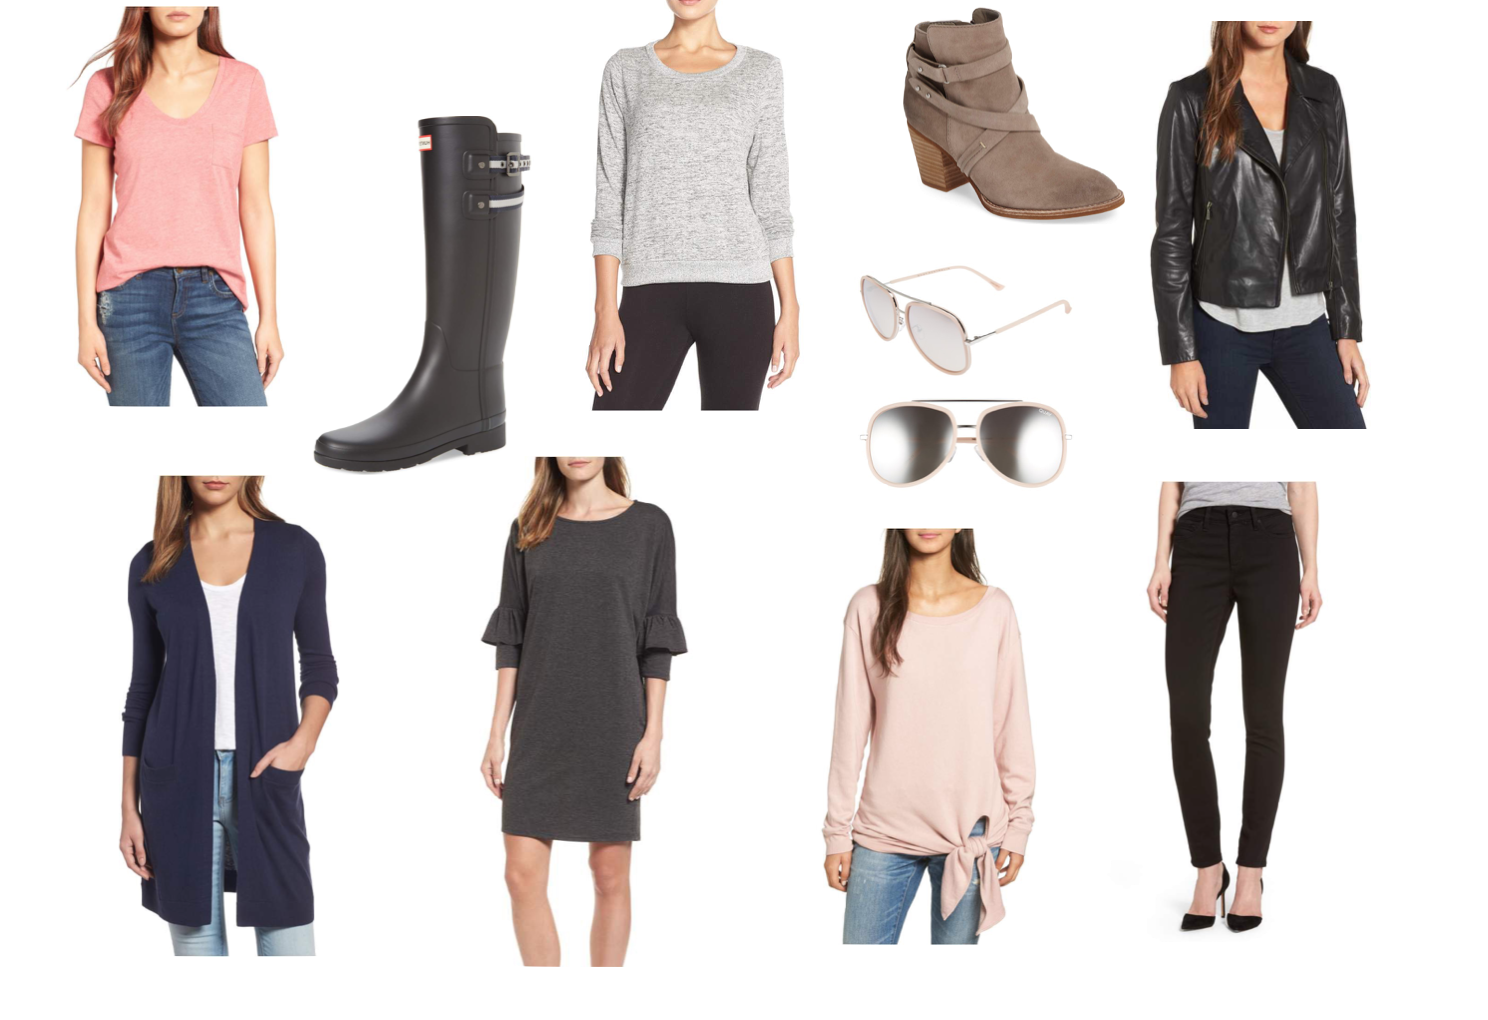 10-things-to-buy-nordstrom-anniversary-sale